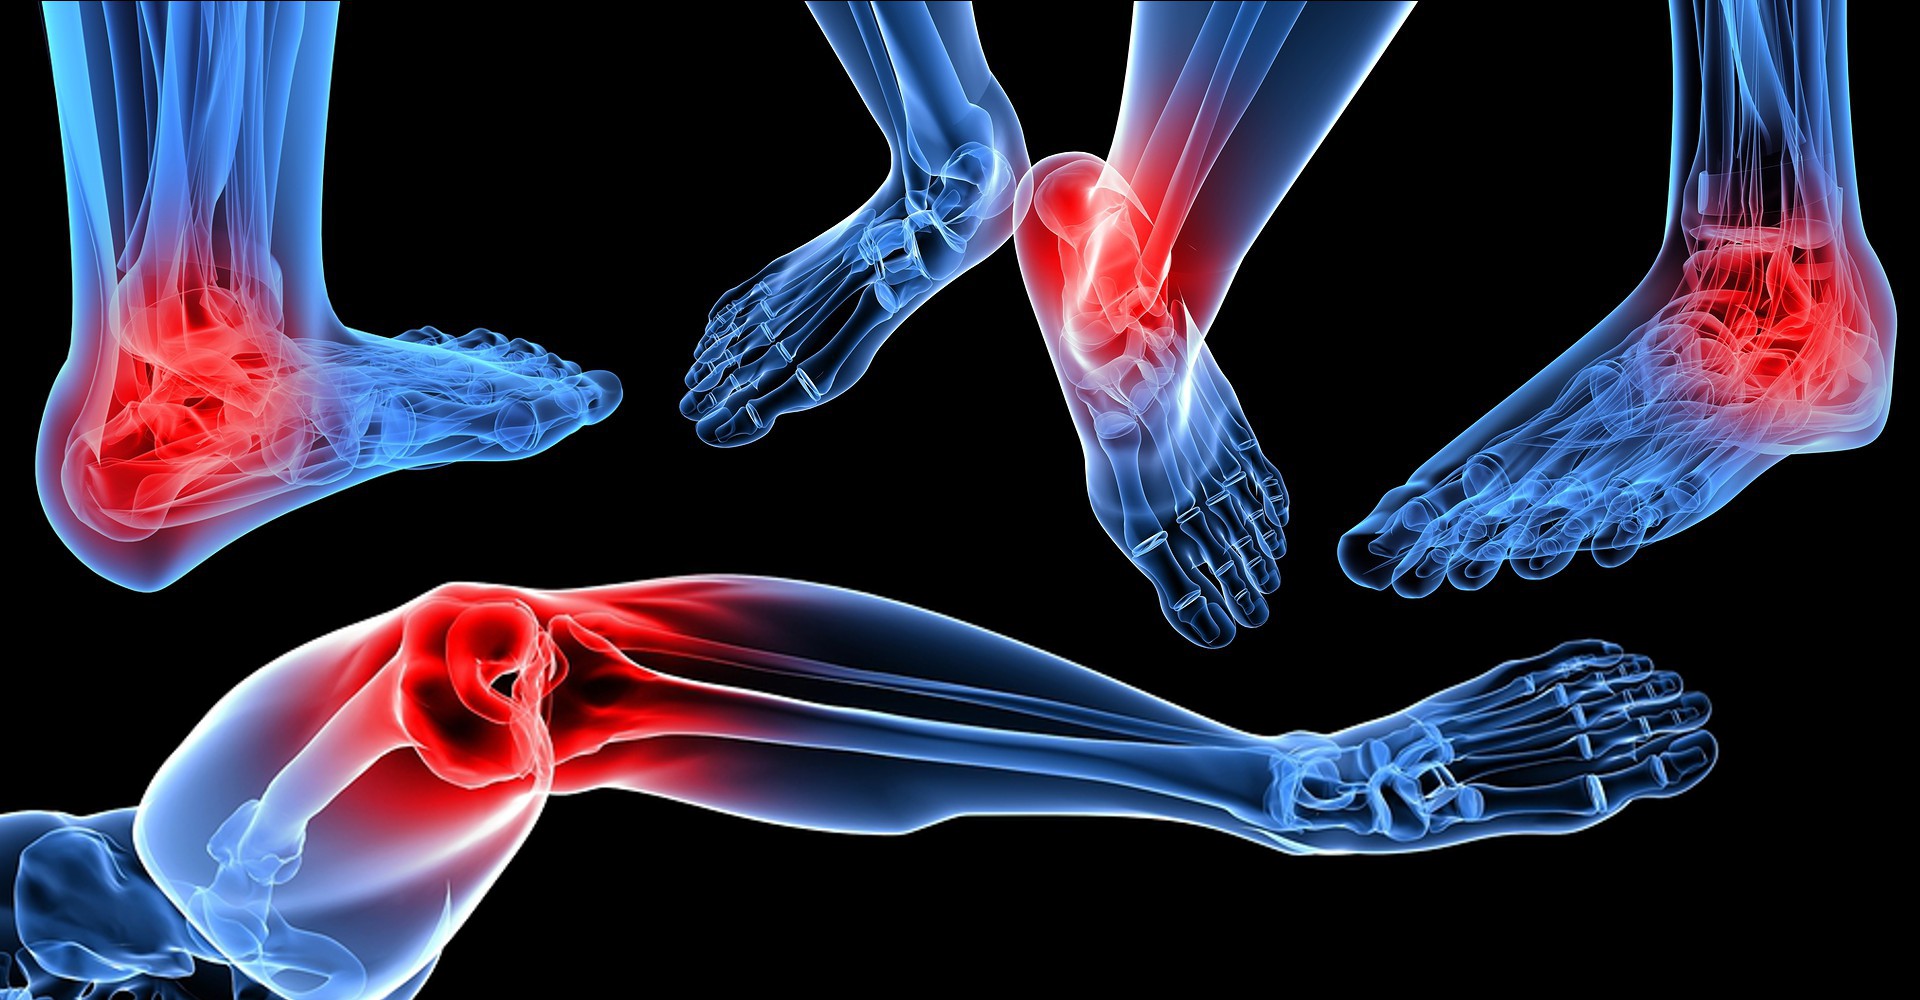 Foot and Ankle Injury Treatment calgary Alberta